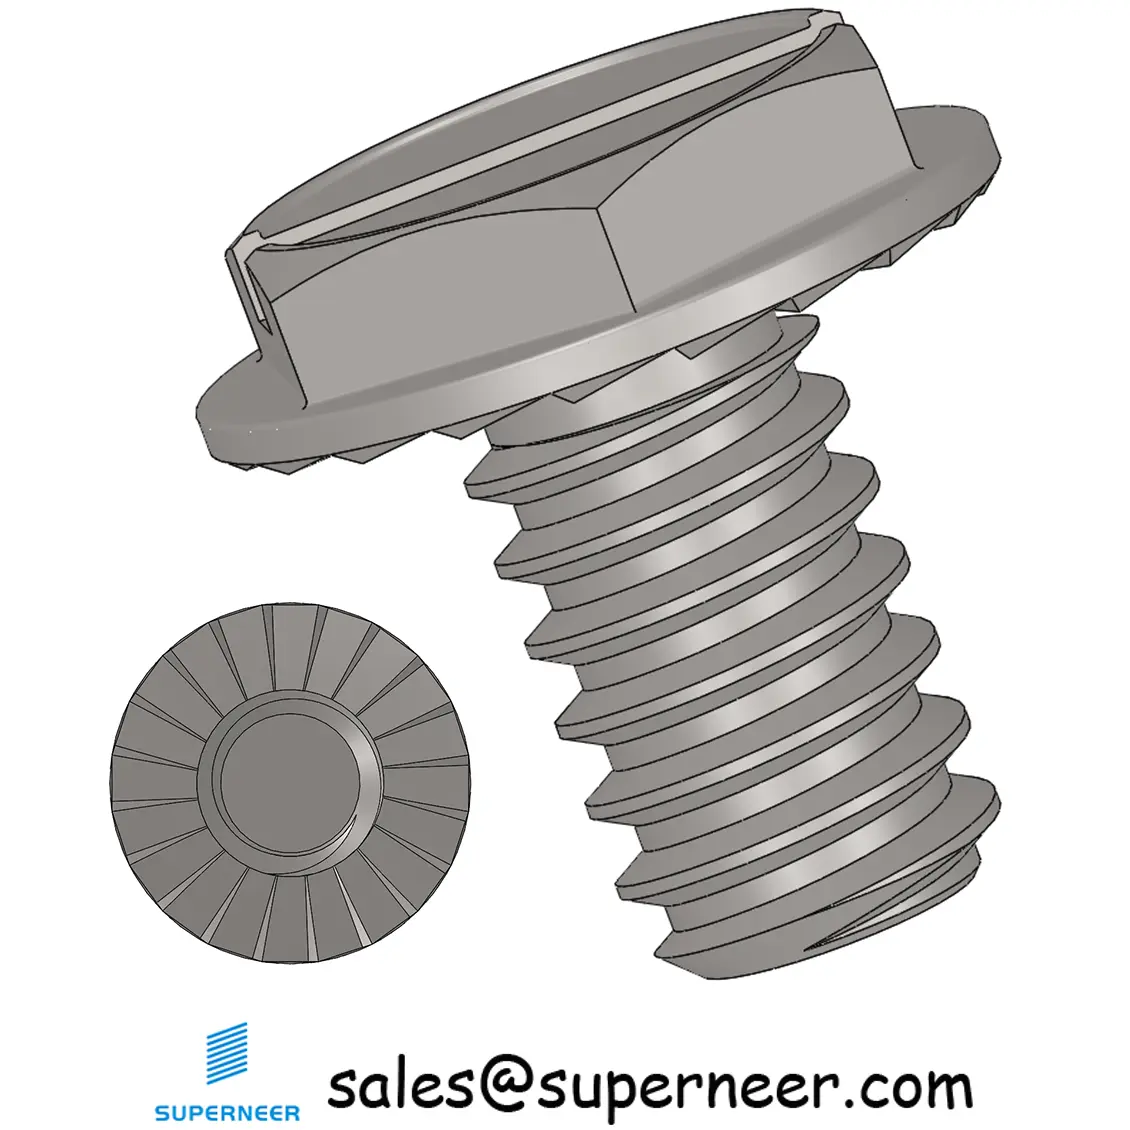 4-40 x 3/16" Indented Hex Washer Serrated Head Slotted Machine Screw SUS304 Stainless Steel Inox